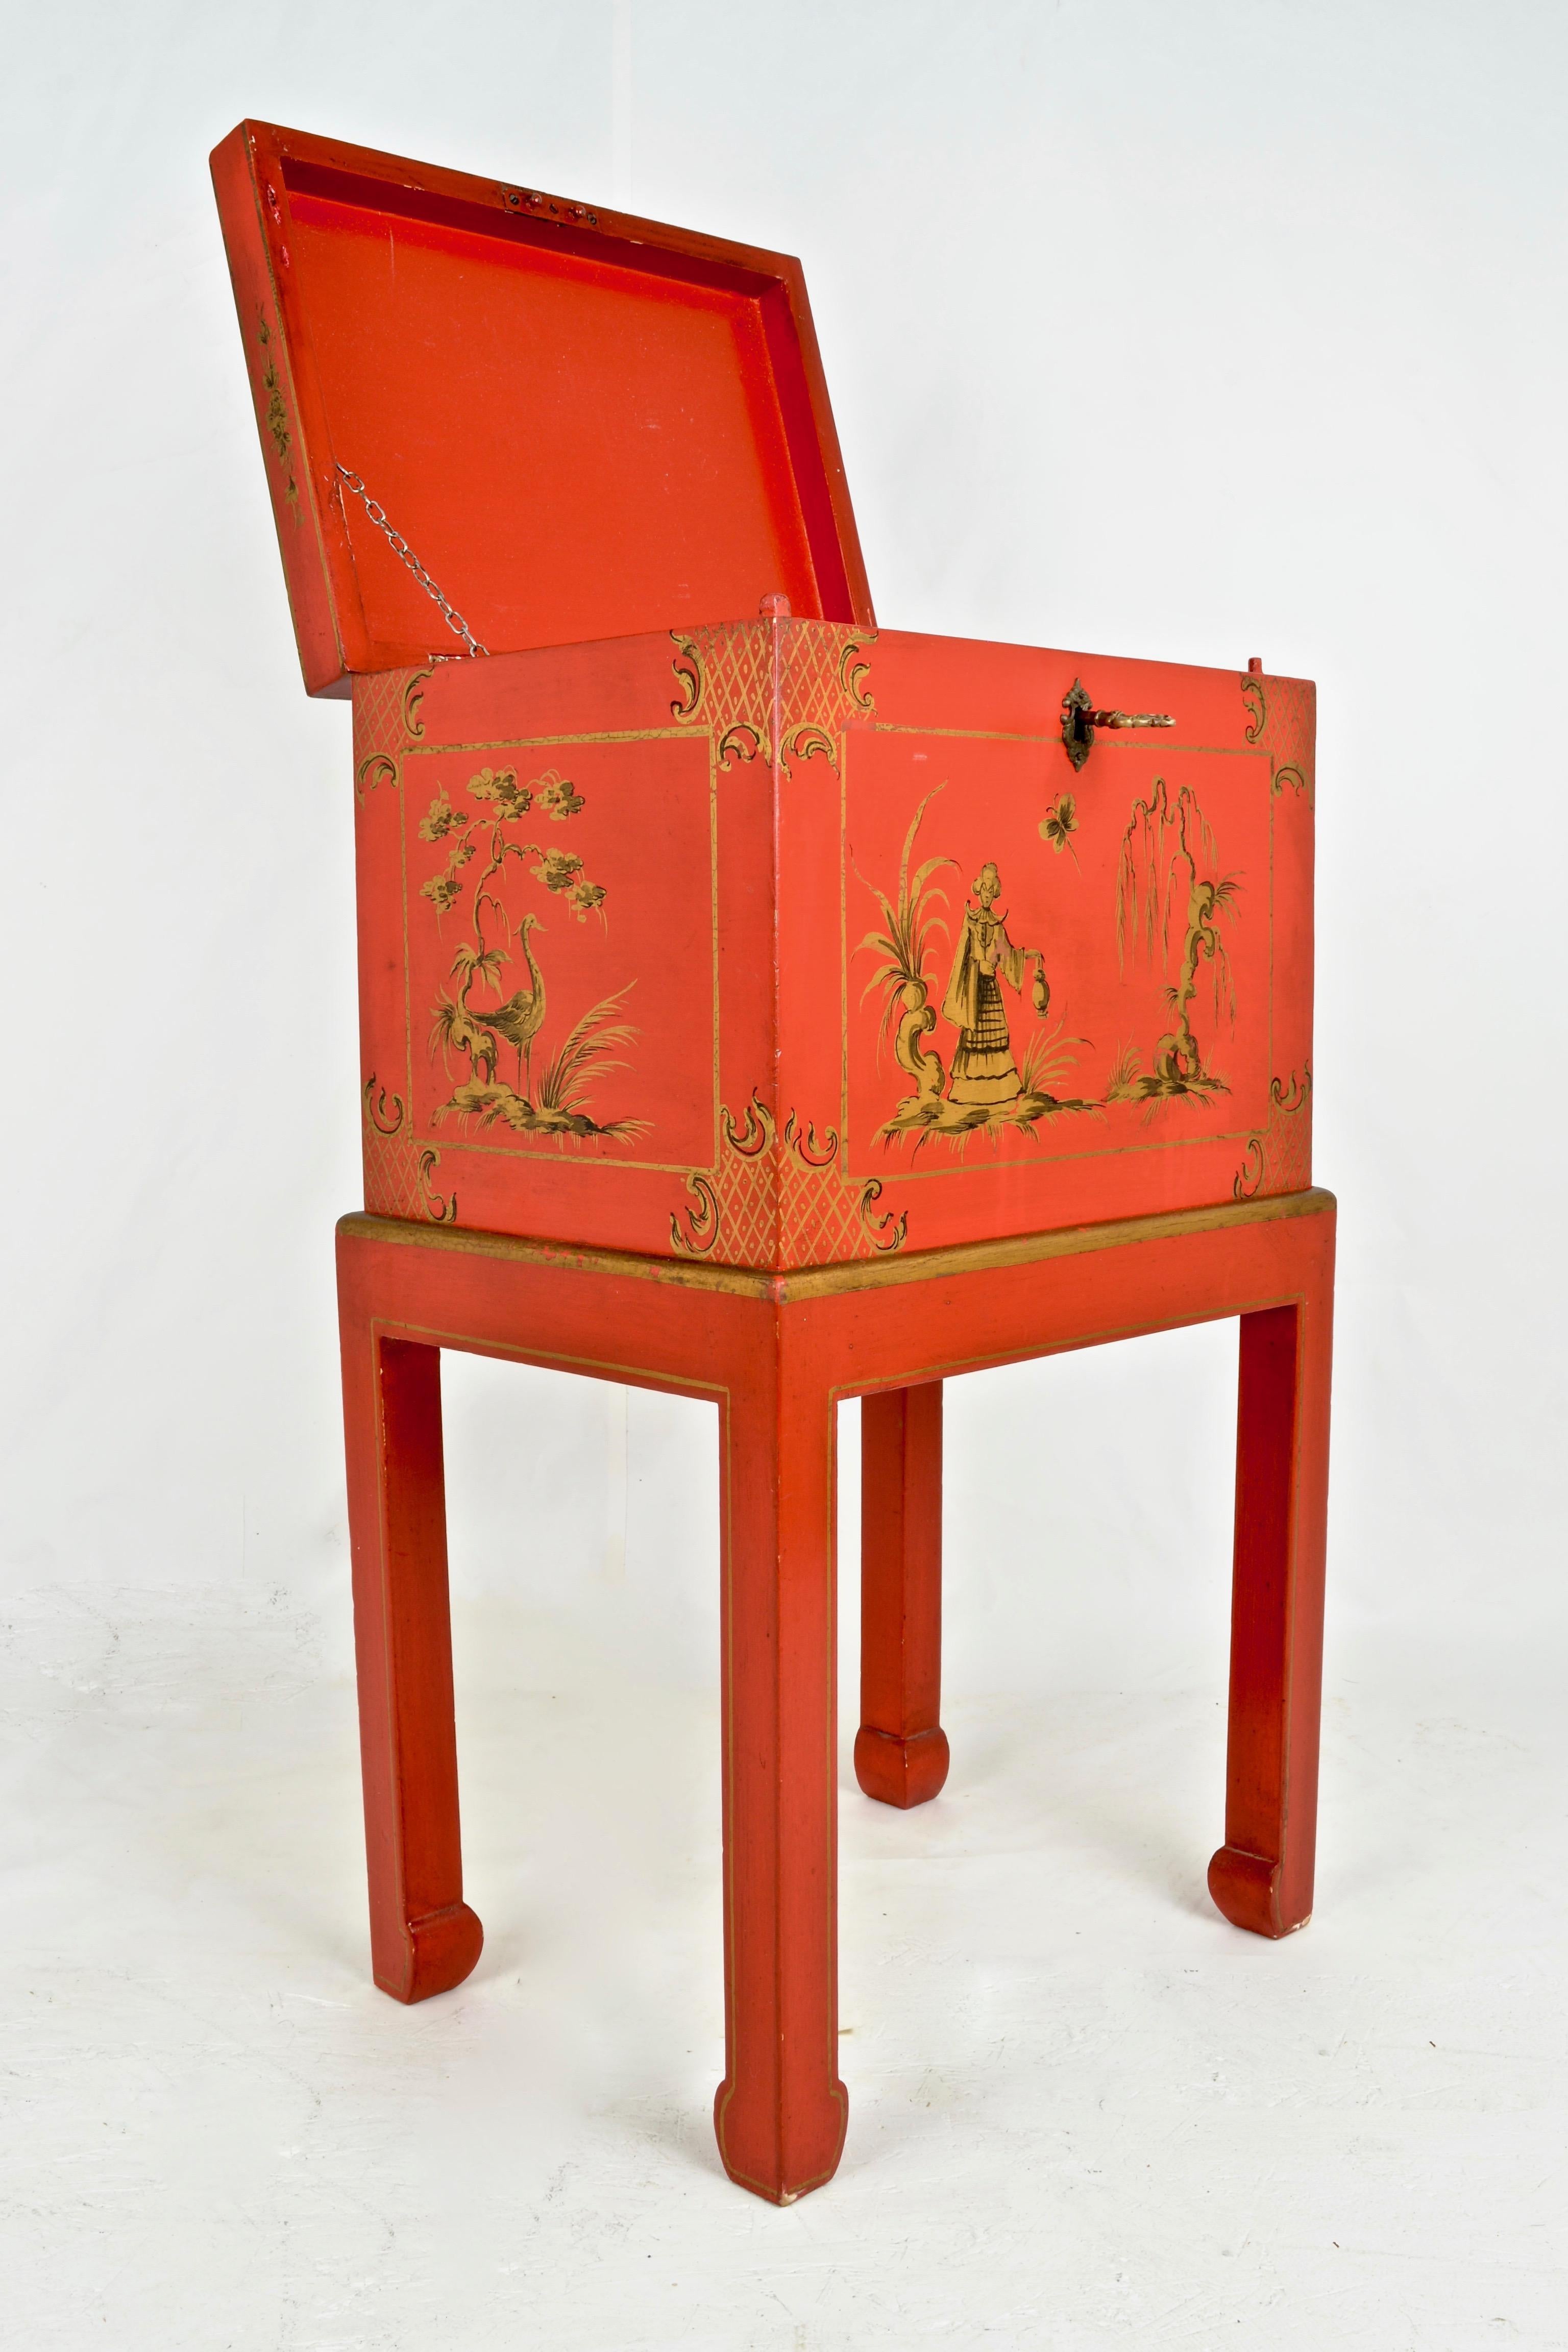 Wonderful color! Featuring hand painted gold decoration and figured brass key, this lidded box on stand has lots of charm. The box lifts off the custom stand. Interior in matching orange finish. Generally very fine condition with very little wear.